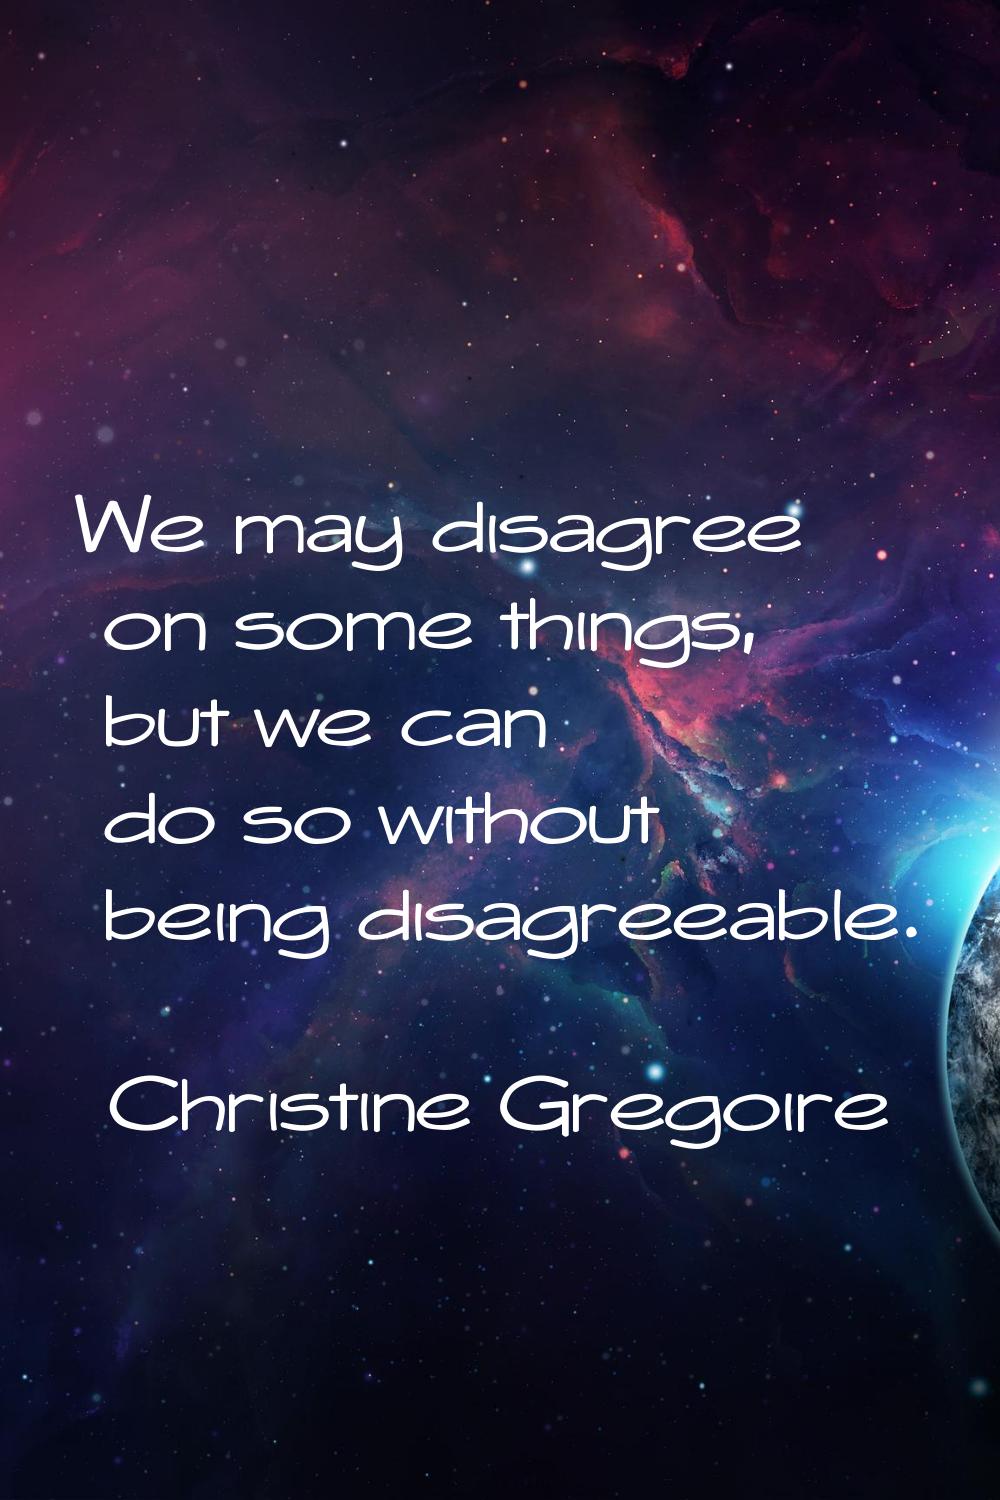 We may disagree on some things, but we can do so without being disagreeable.